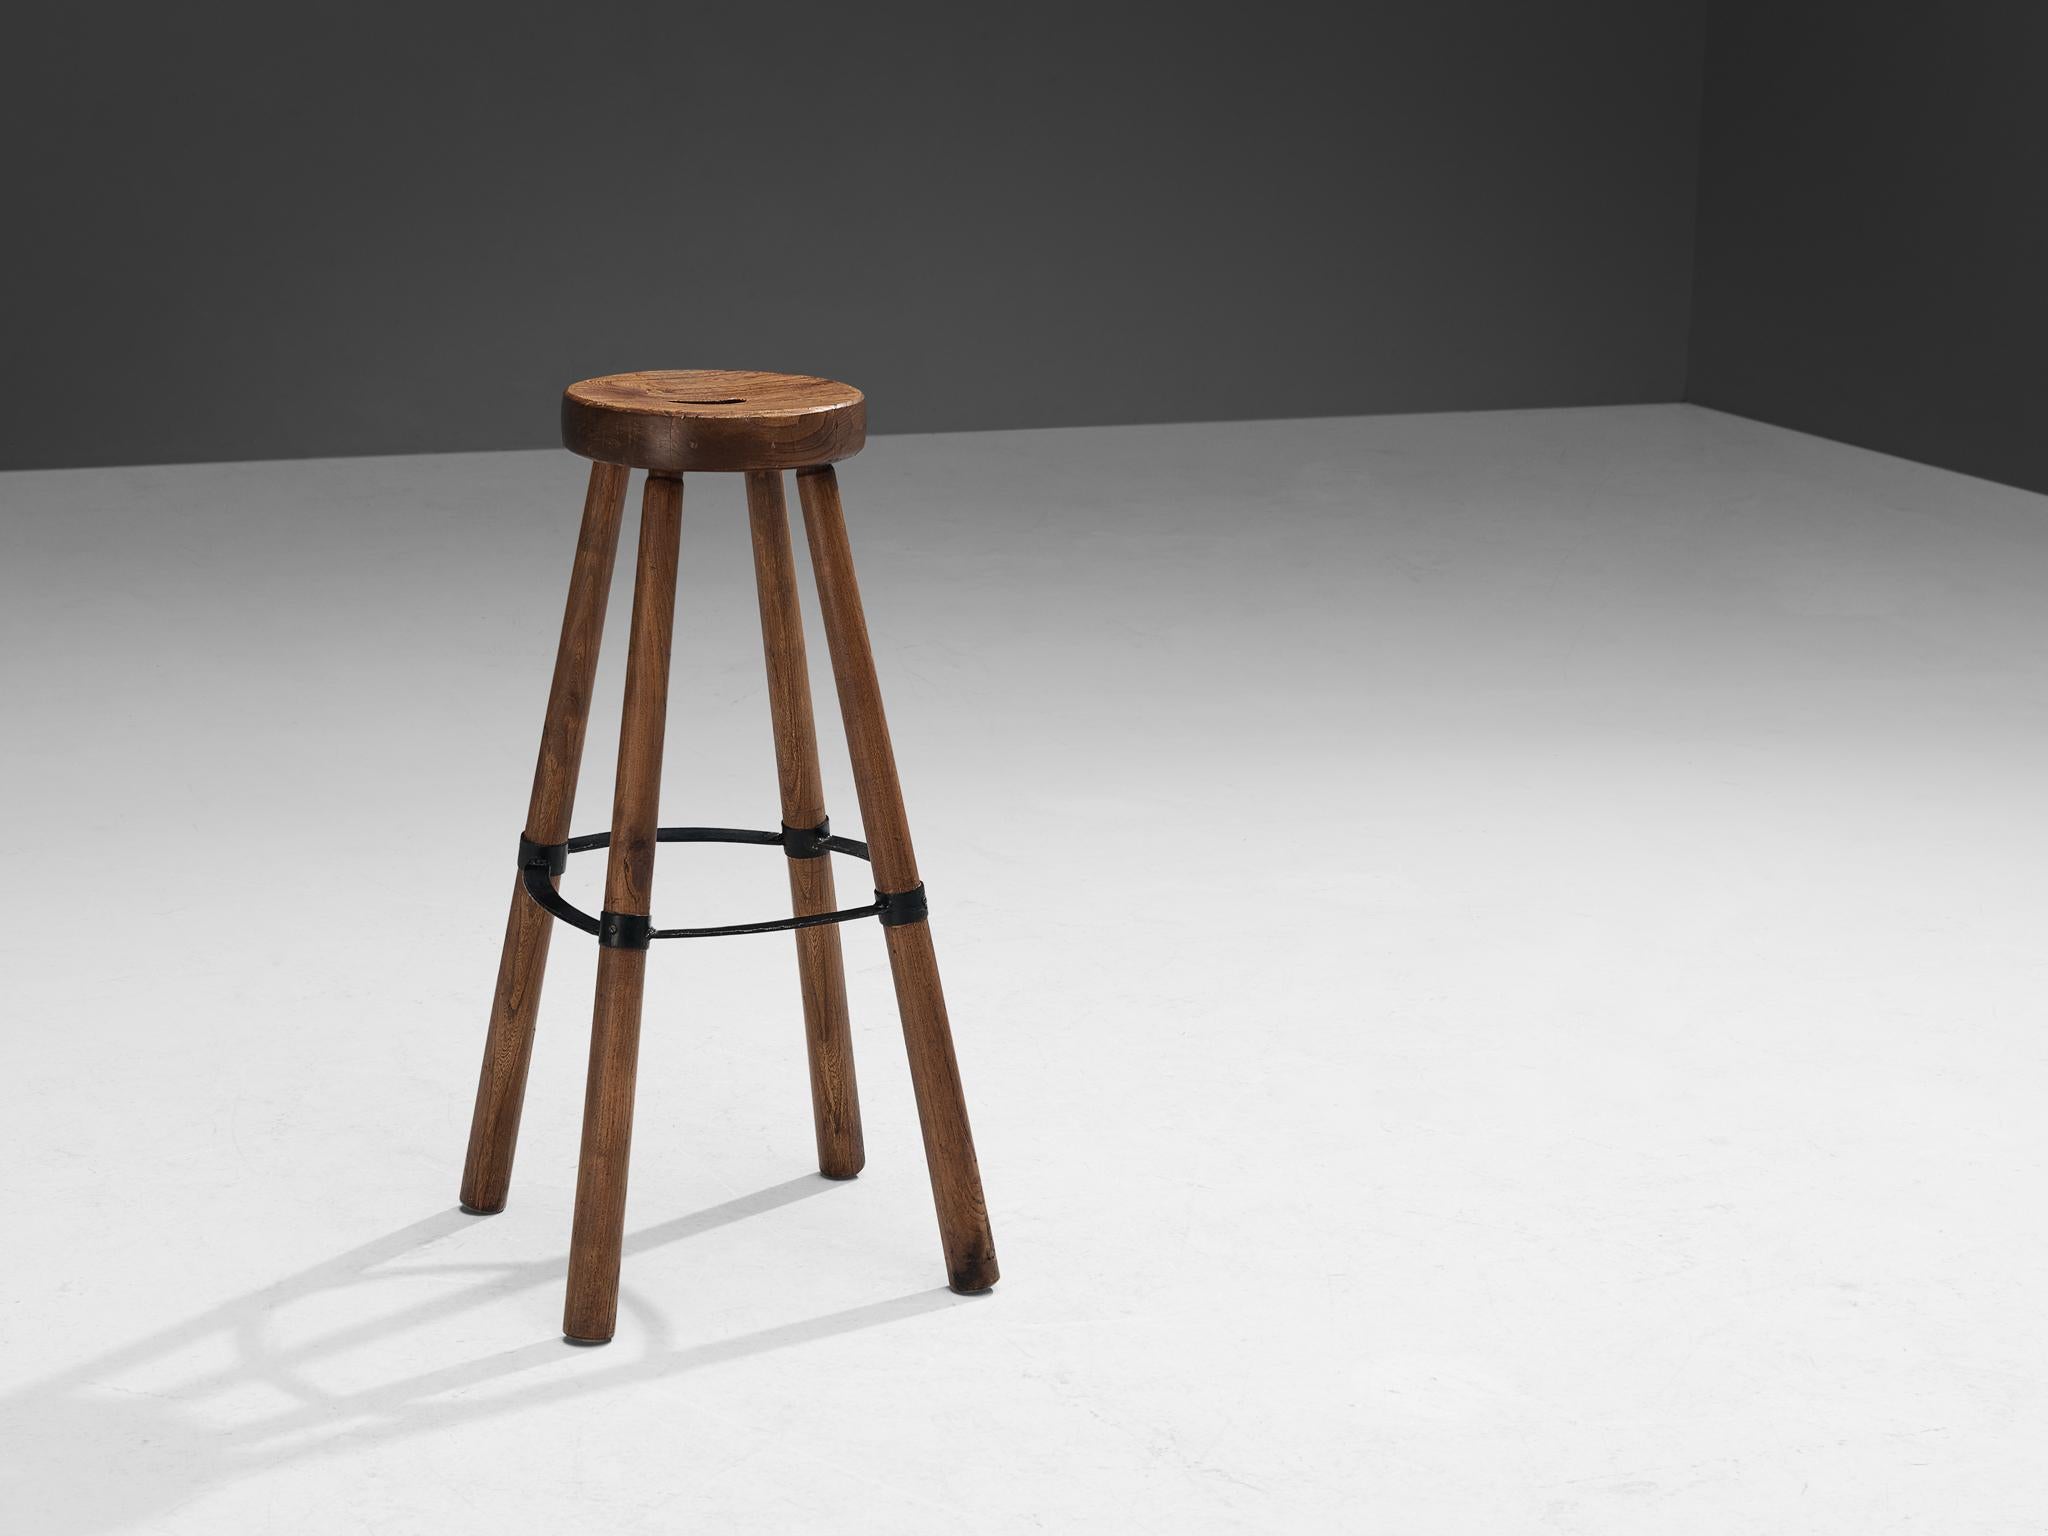 Bar stool, metal, beech, France, 1960s.

Sturdy stool in beech with a great patina and metal ring around the crux of the stool. This piece strongly reminds of the furniture produced by 'Les Artisans de Marolles' in the 1950s and 1960s. A